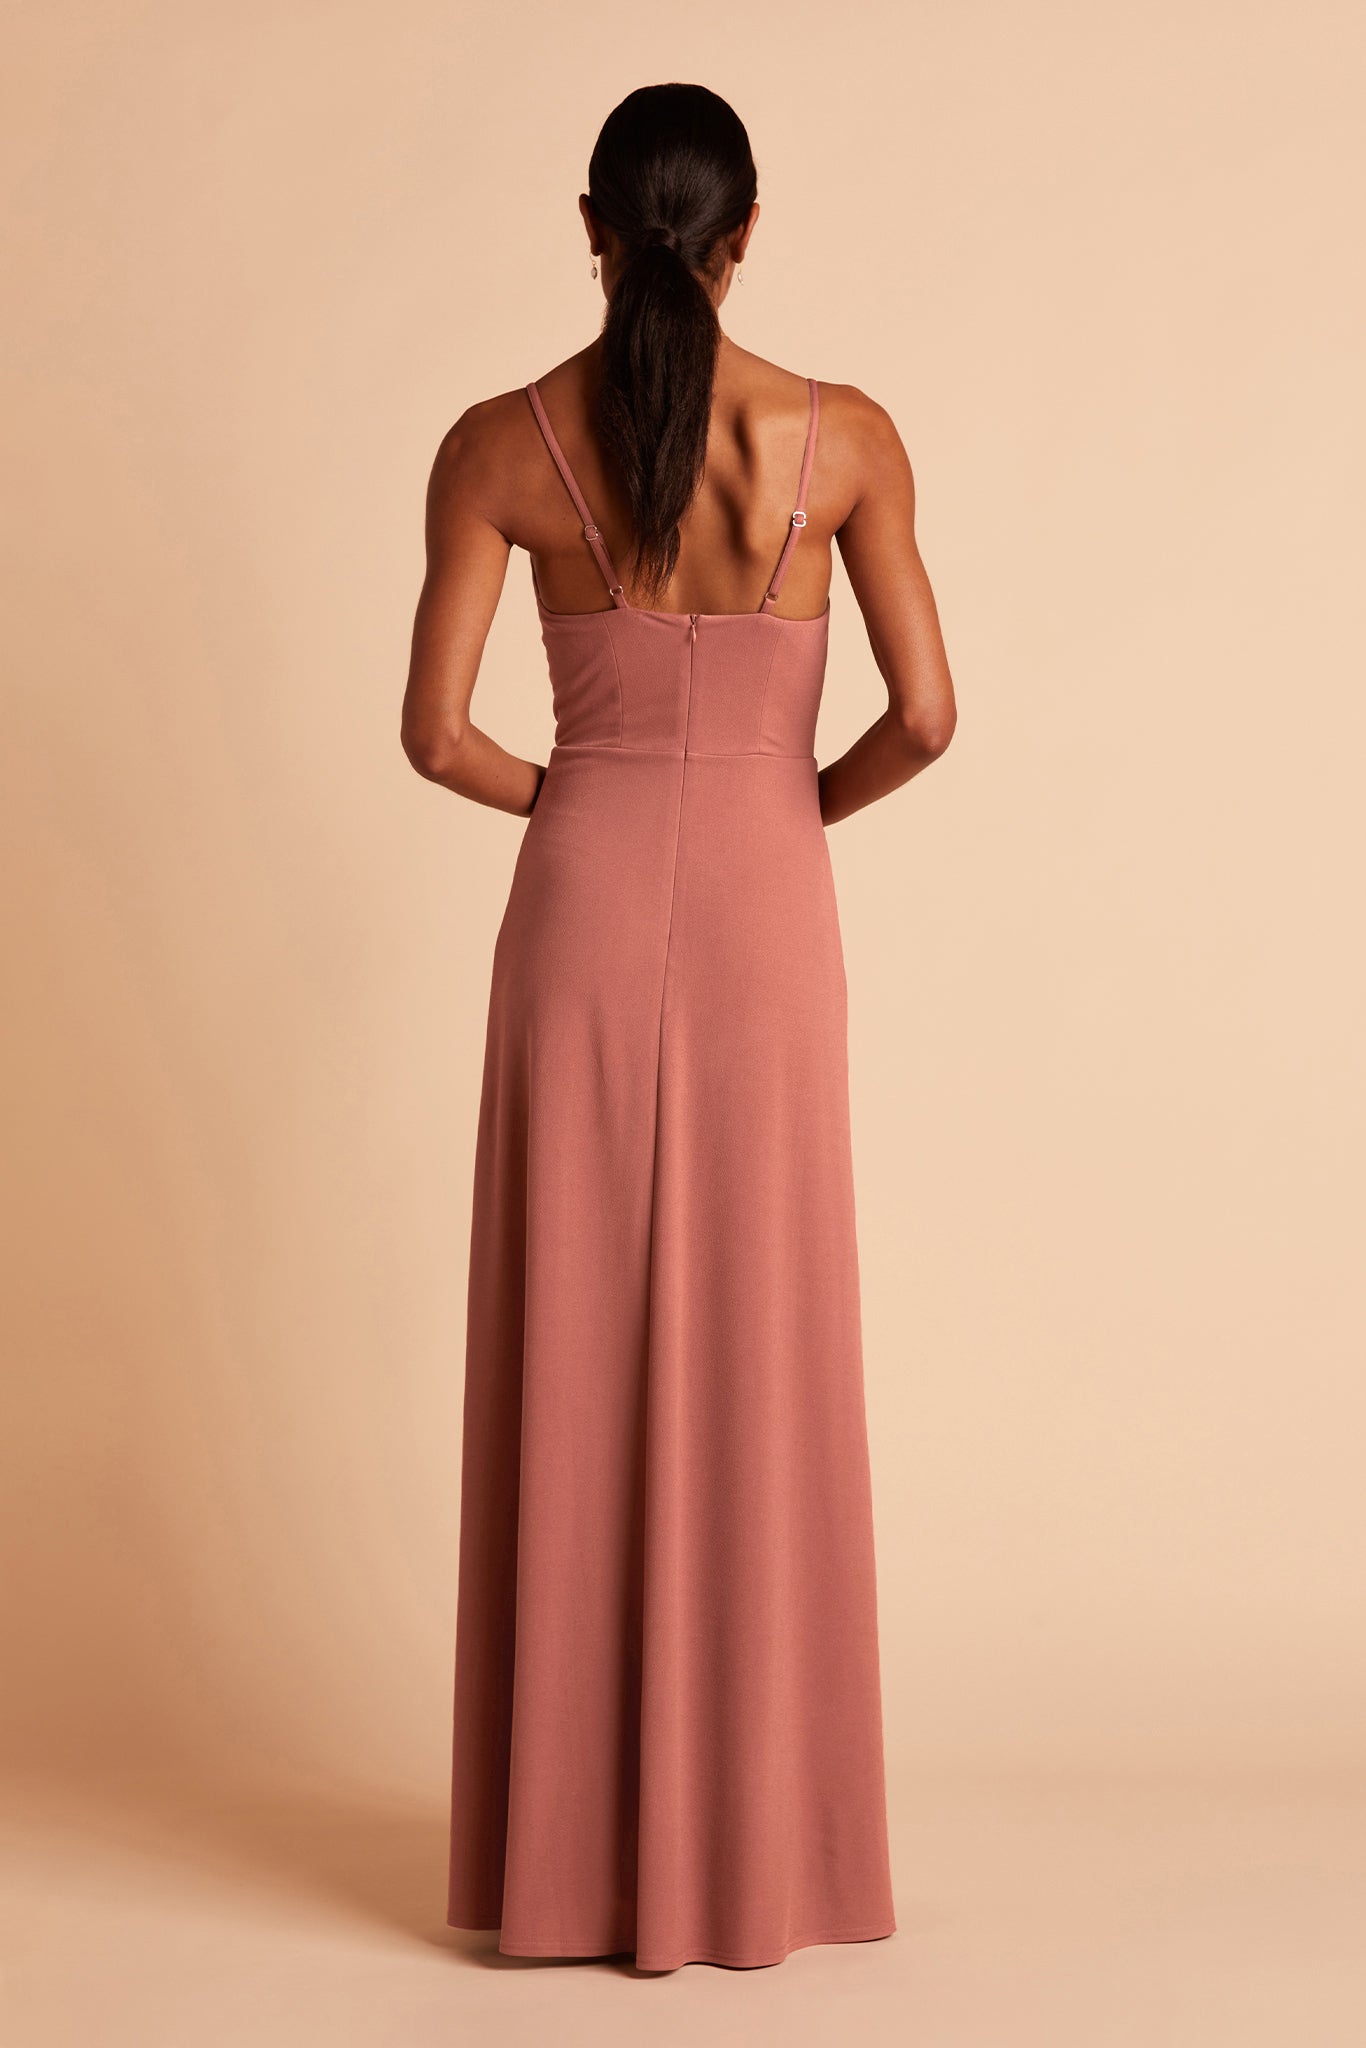 Ash bridesmaid dress with slit in desert rose by Birdy Grey, back view